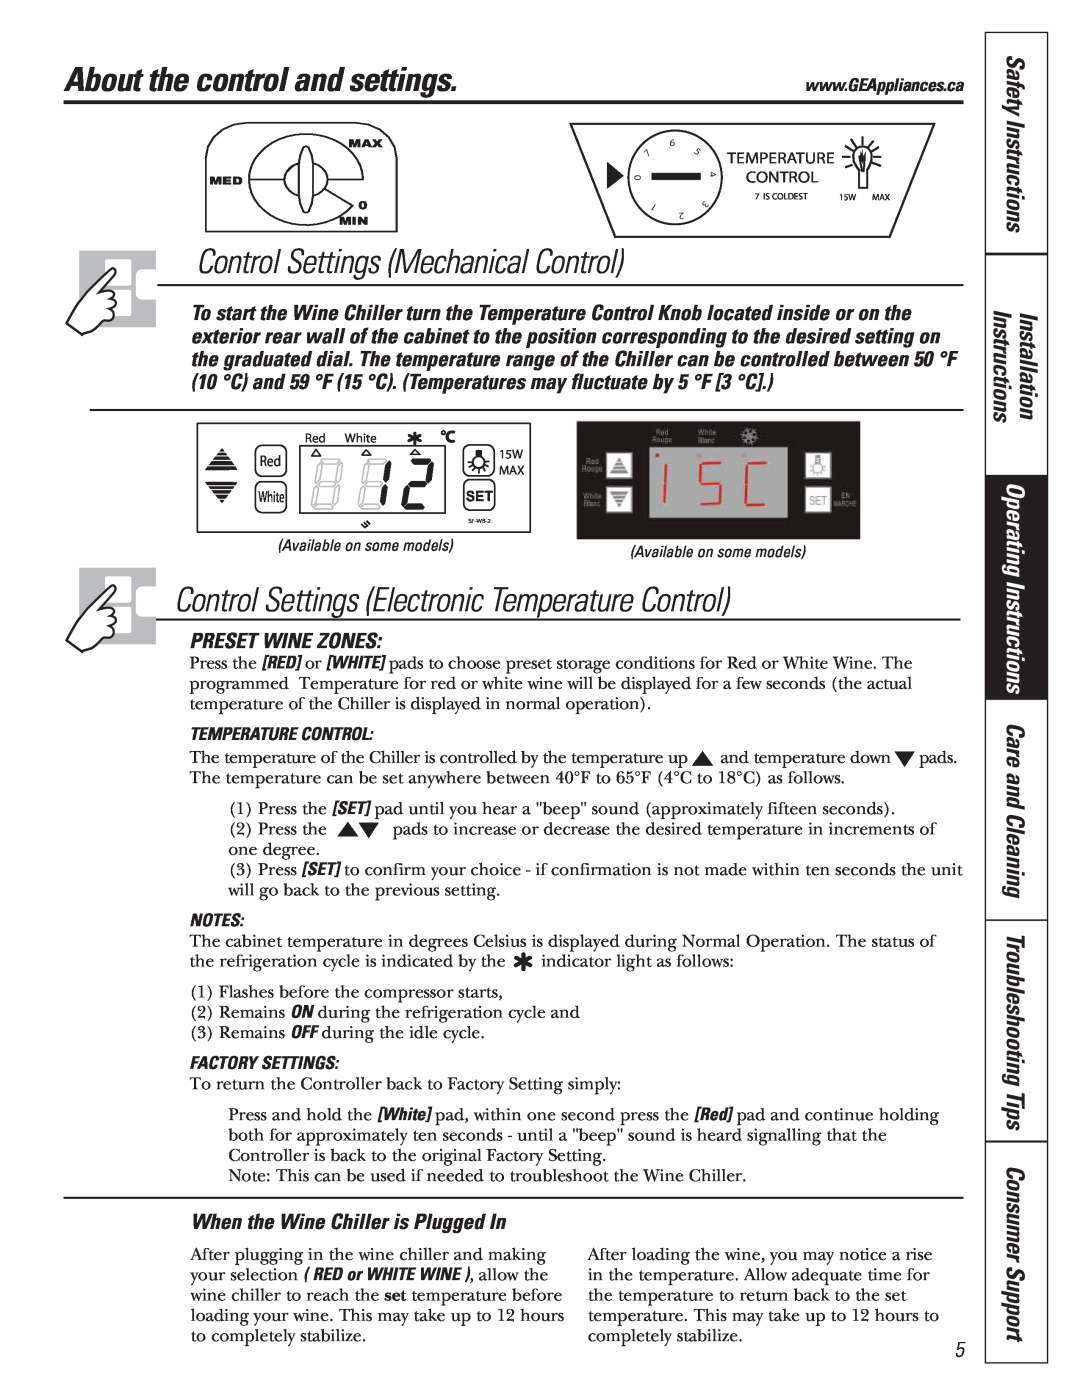 Mabe Canada GWS04 About the control and settings, Control Settings Electronic Temperature Control, Support, Instructions 